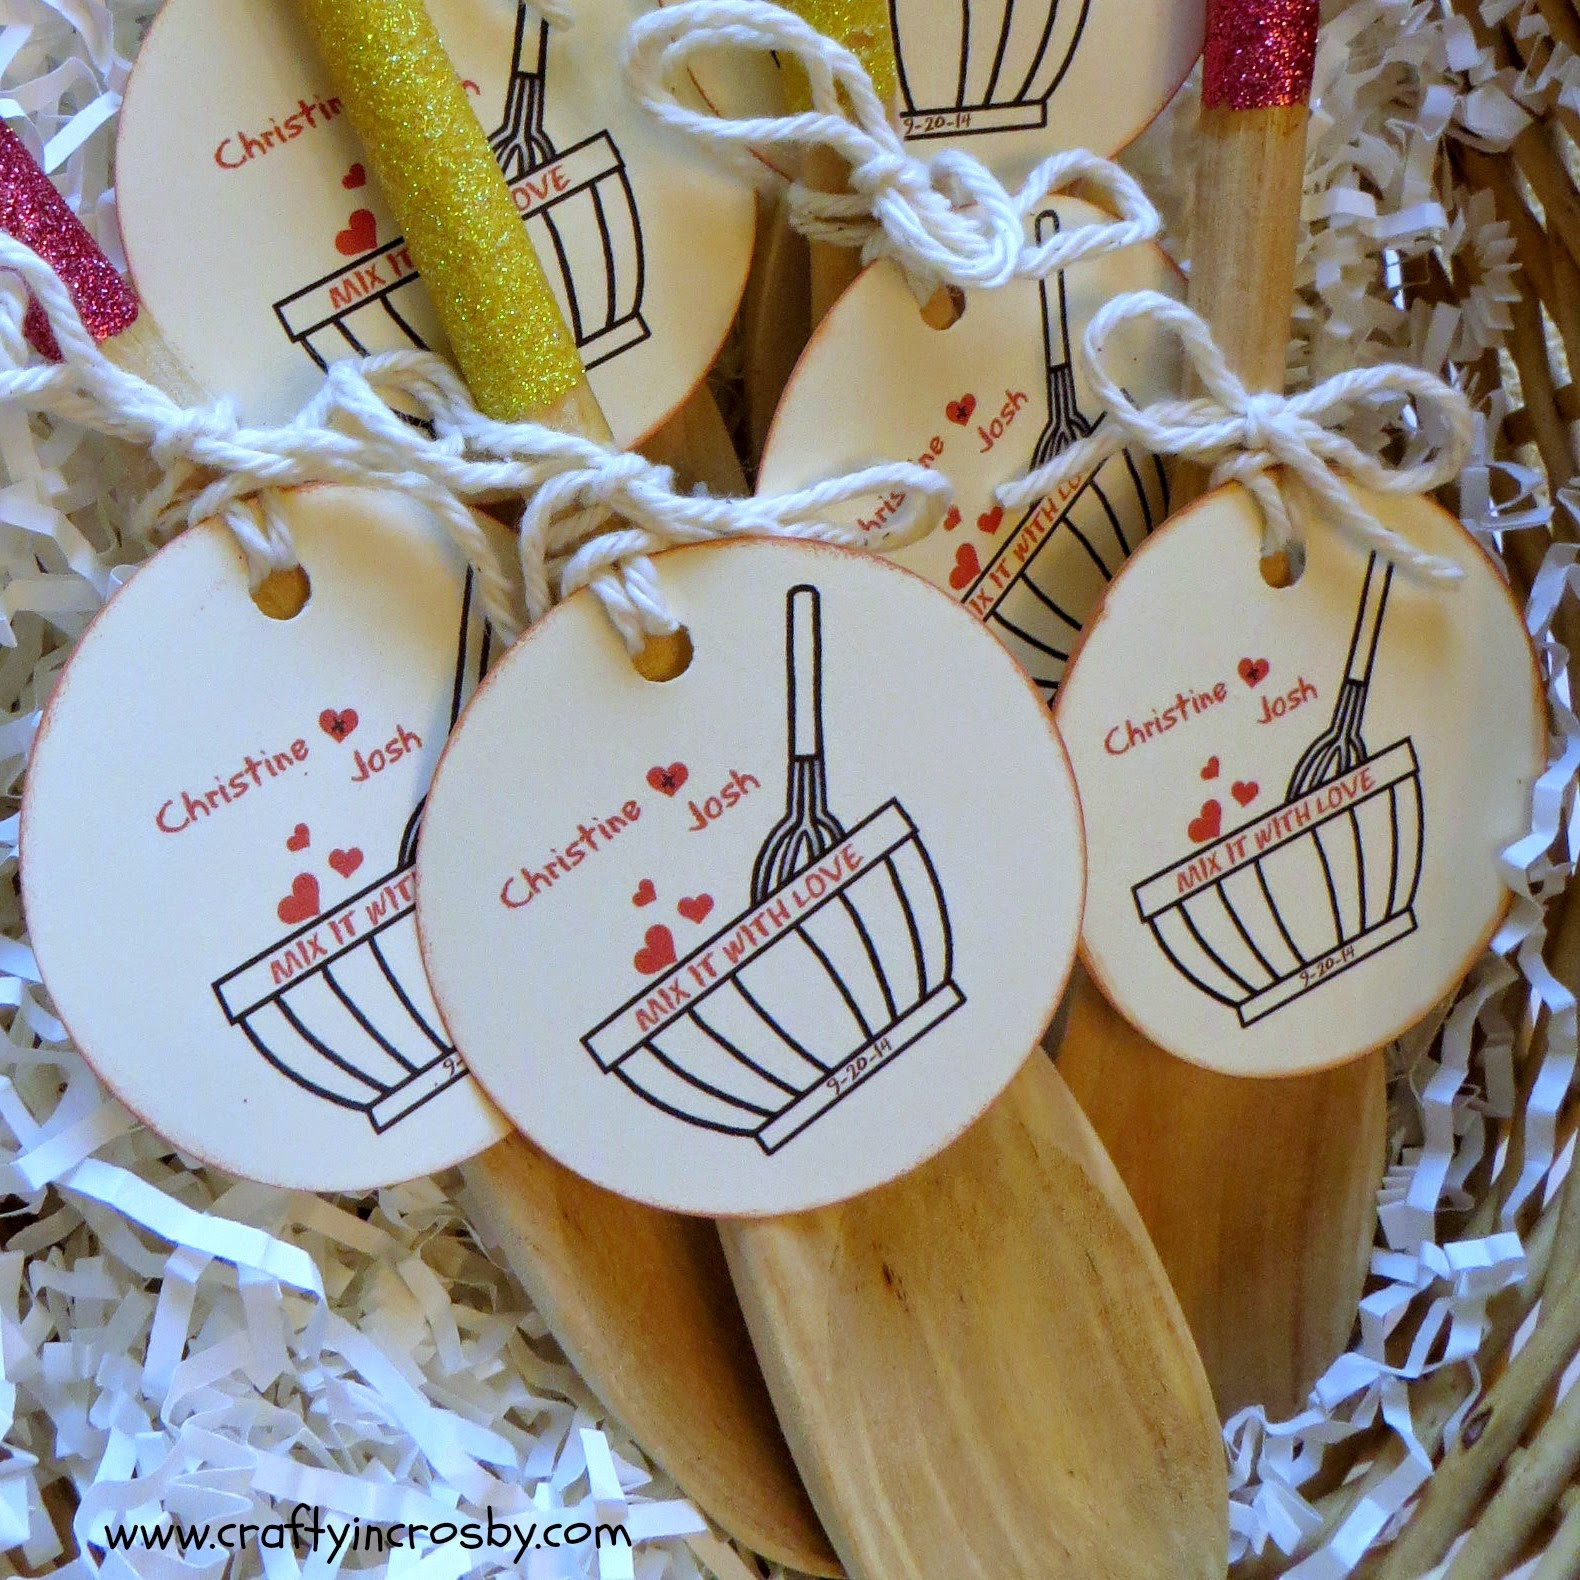 Wedding Shower Favor Ideas
 Crafty in Crosby Bridal Shower Favors Mix it With Love